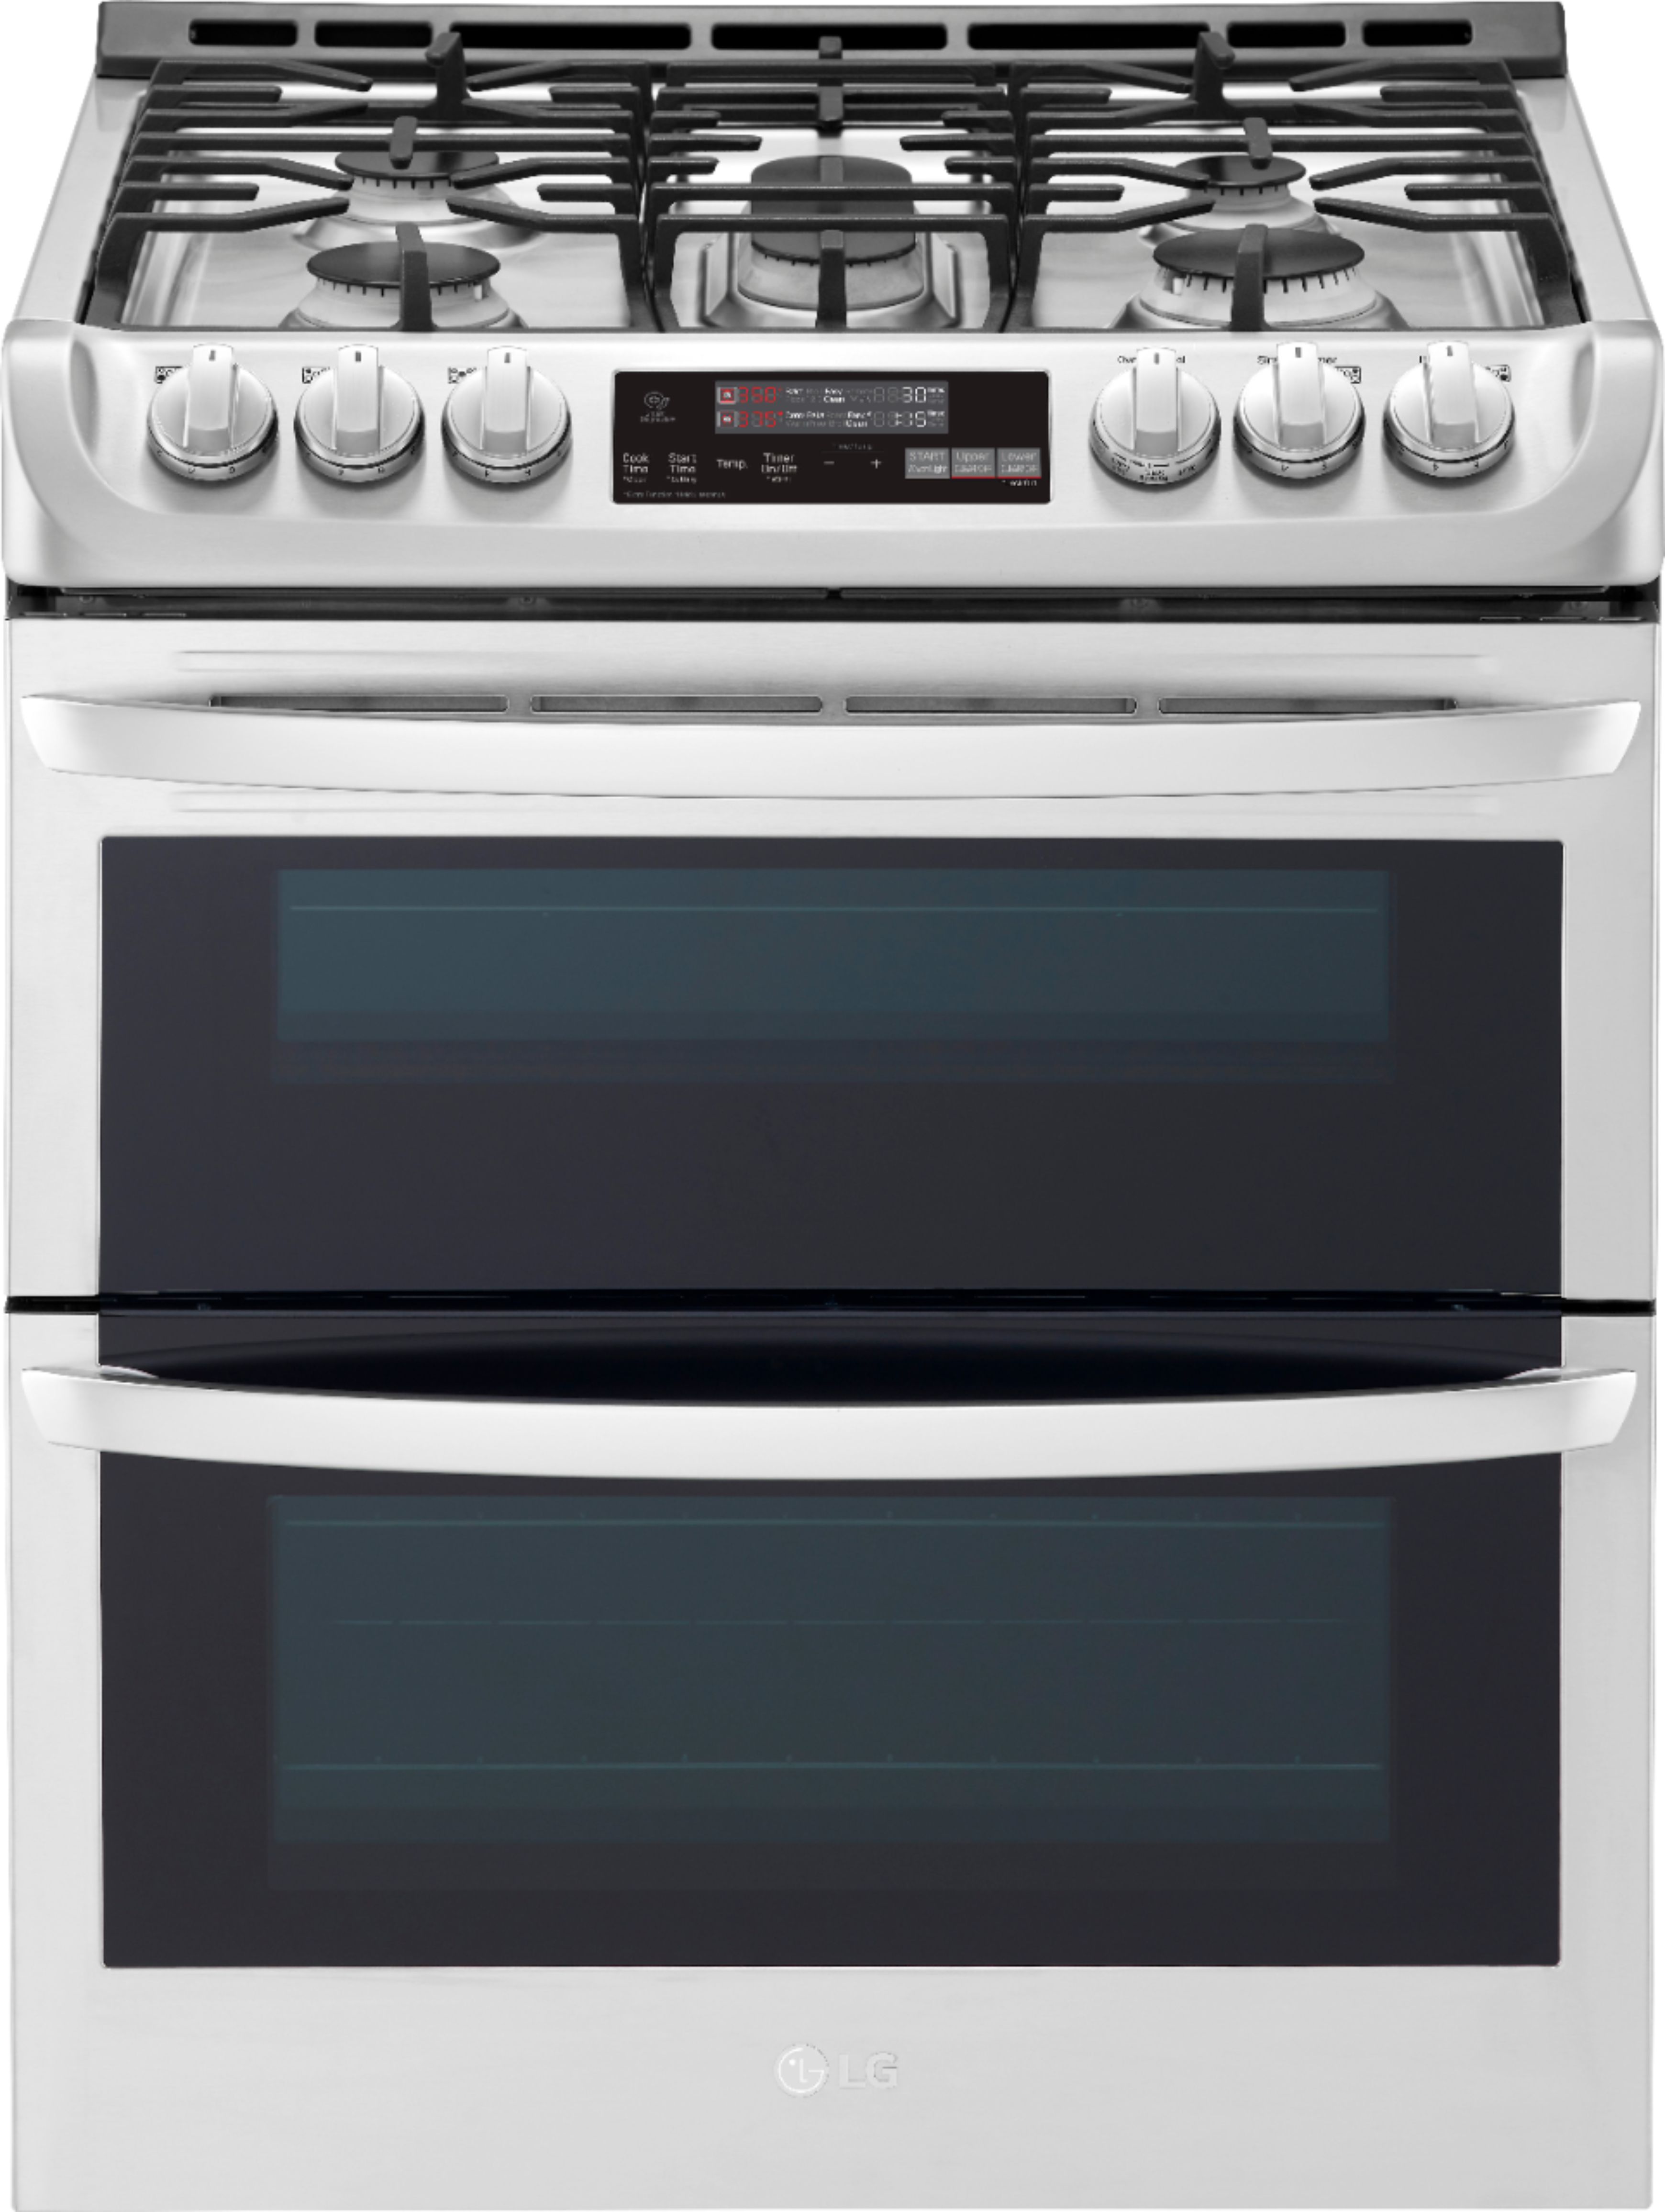 LG – 6.9 Cu. Ft. Self-Cleaning Slide-In Double Oven Gas Smart Wi-Fi Range with ProBake Convection – Stainless steel